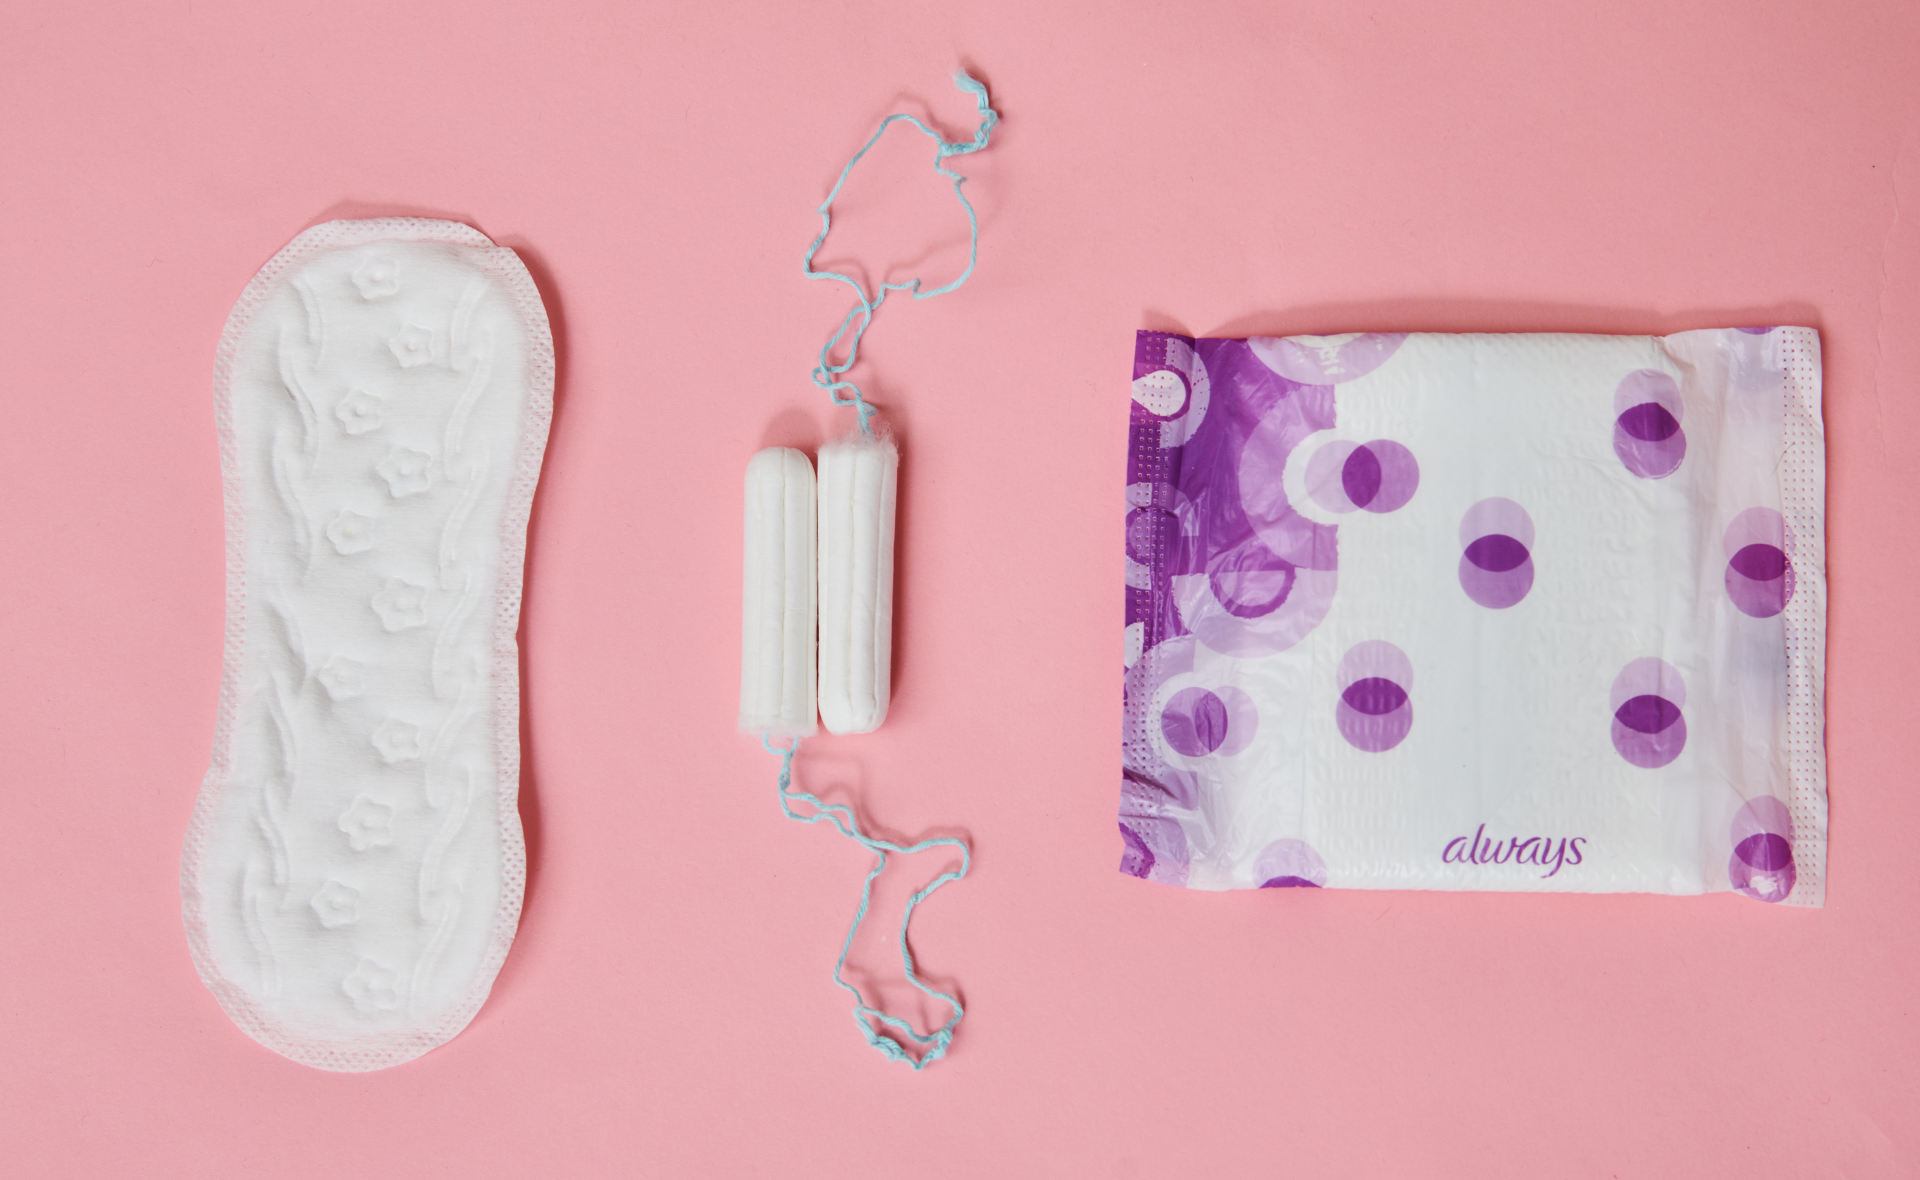 Period poverty explained: What is period poverty and what can you do to help?